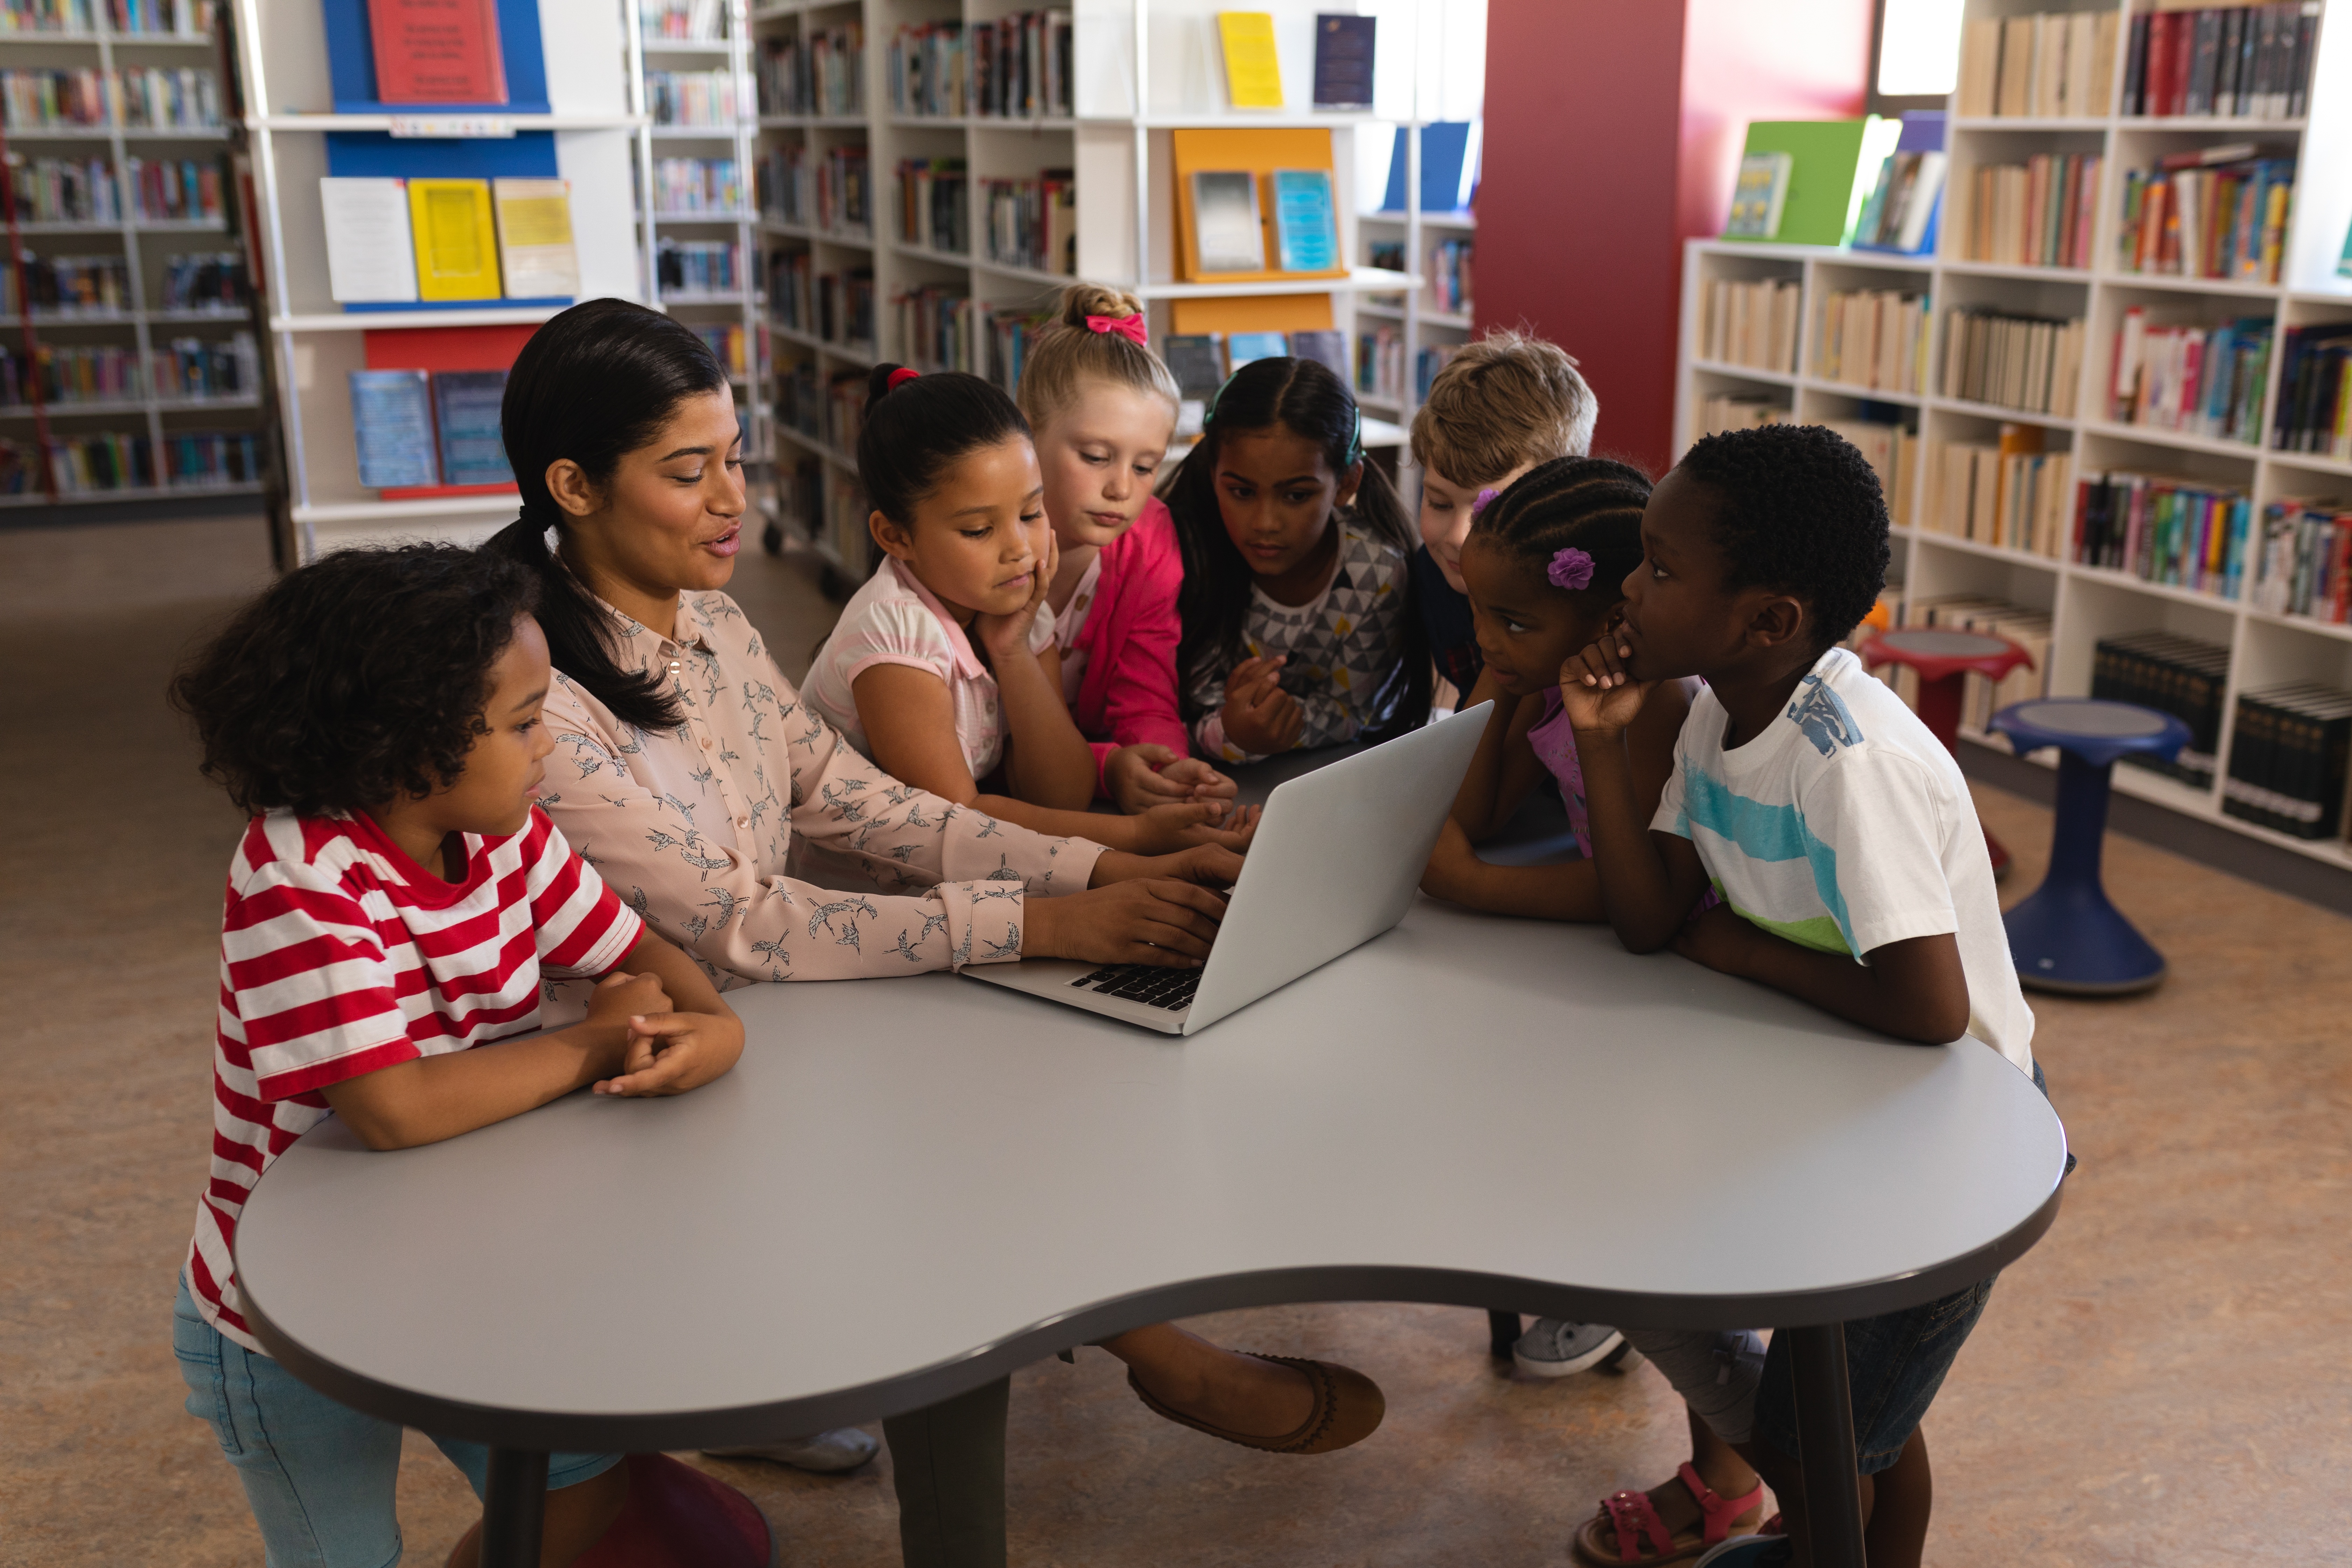 Kids and teacher in a library connected to other libraries through network engineer technology.